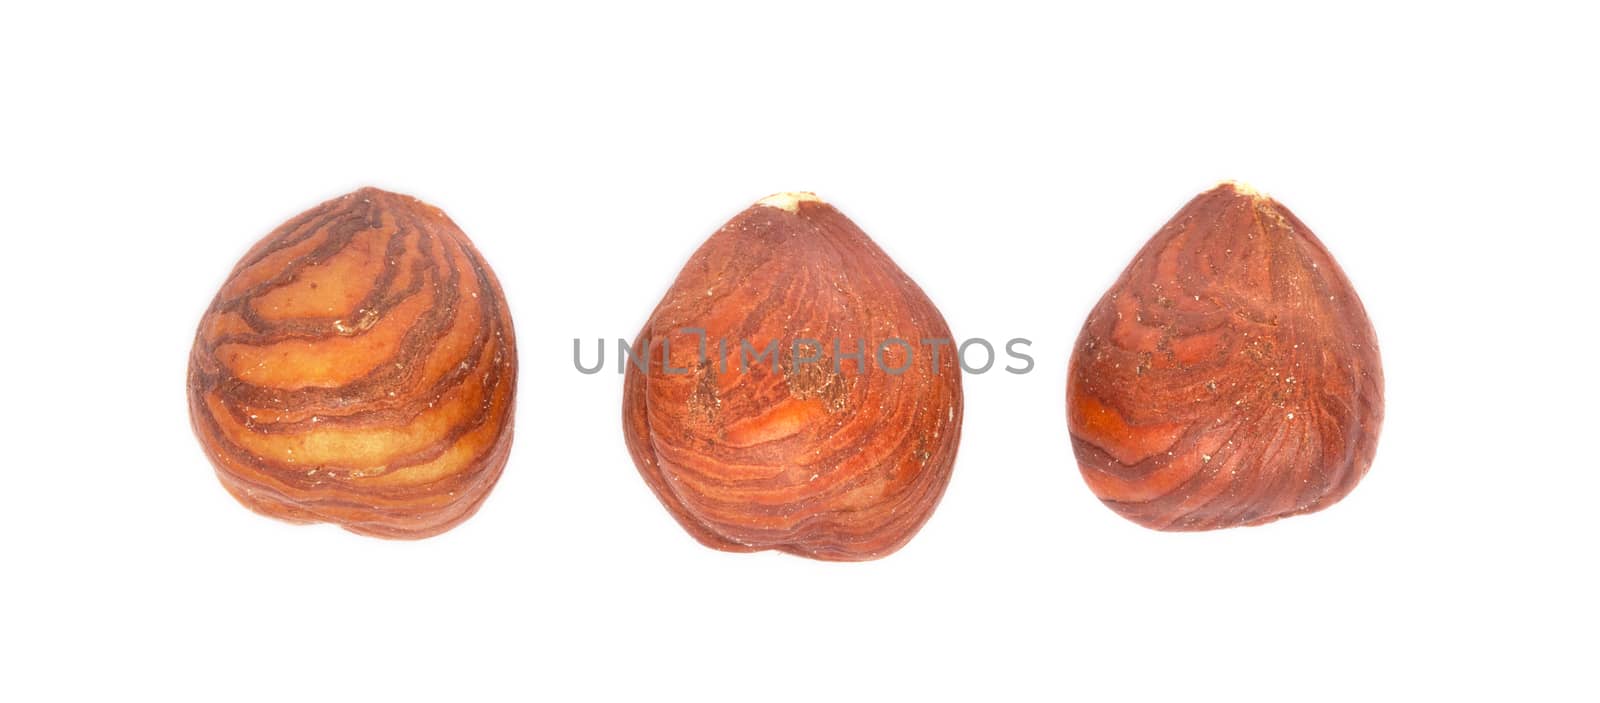 Three hazelnuts on a white background by 25ehaag6